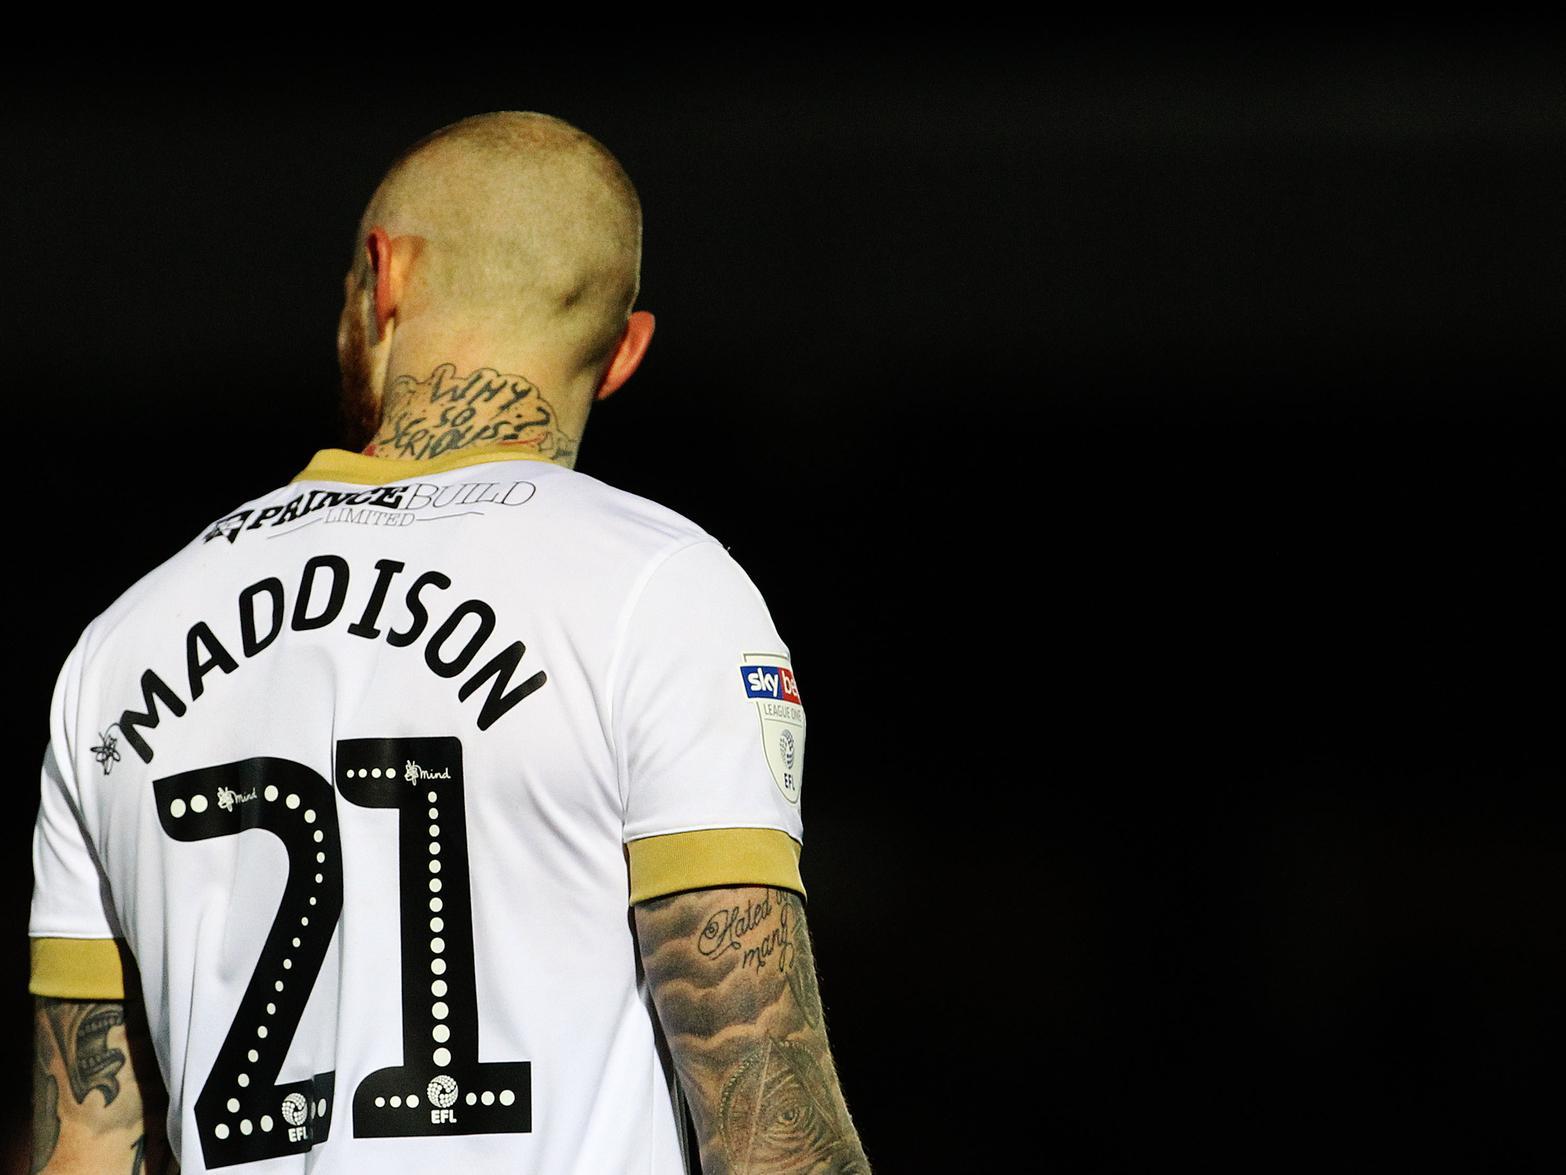 Posh chairman Darragh MacAnthony has confirmed Championship interest in Marcus Maddison, but denied contact from West Brom. (Birmingham Live)